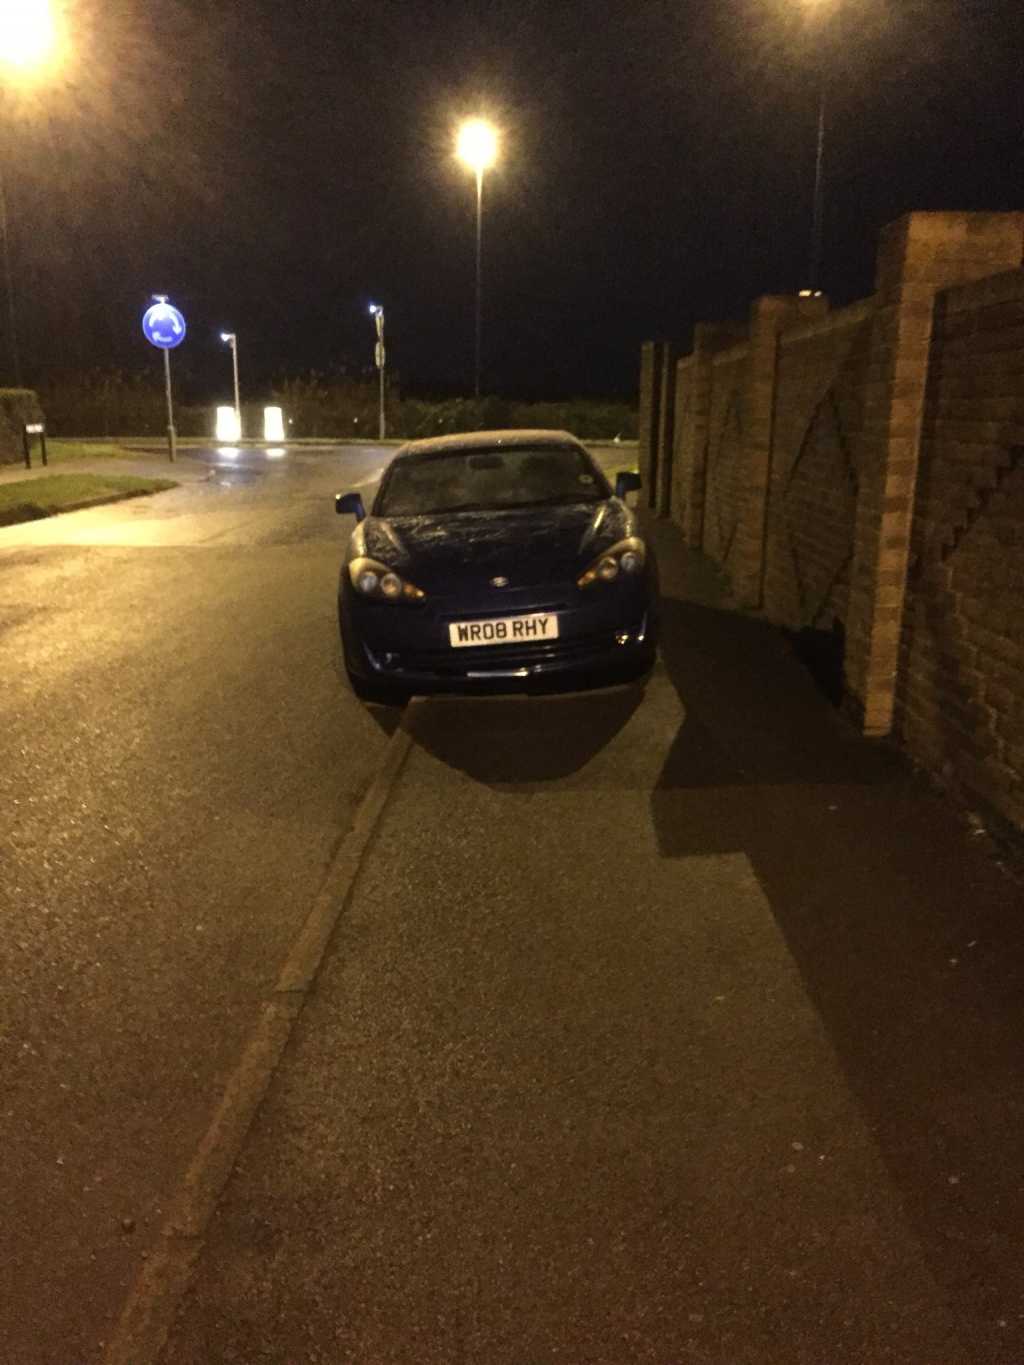 WR08 RHY displaying Inconsiderate Parking